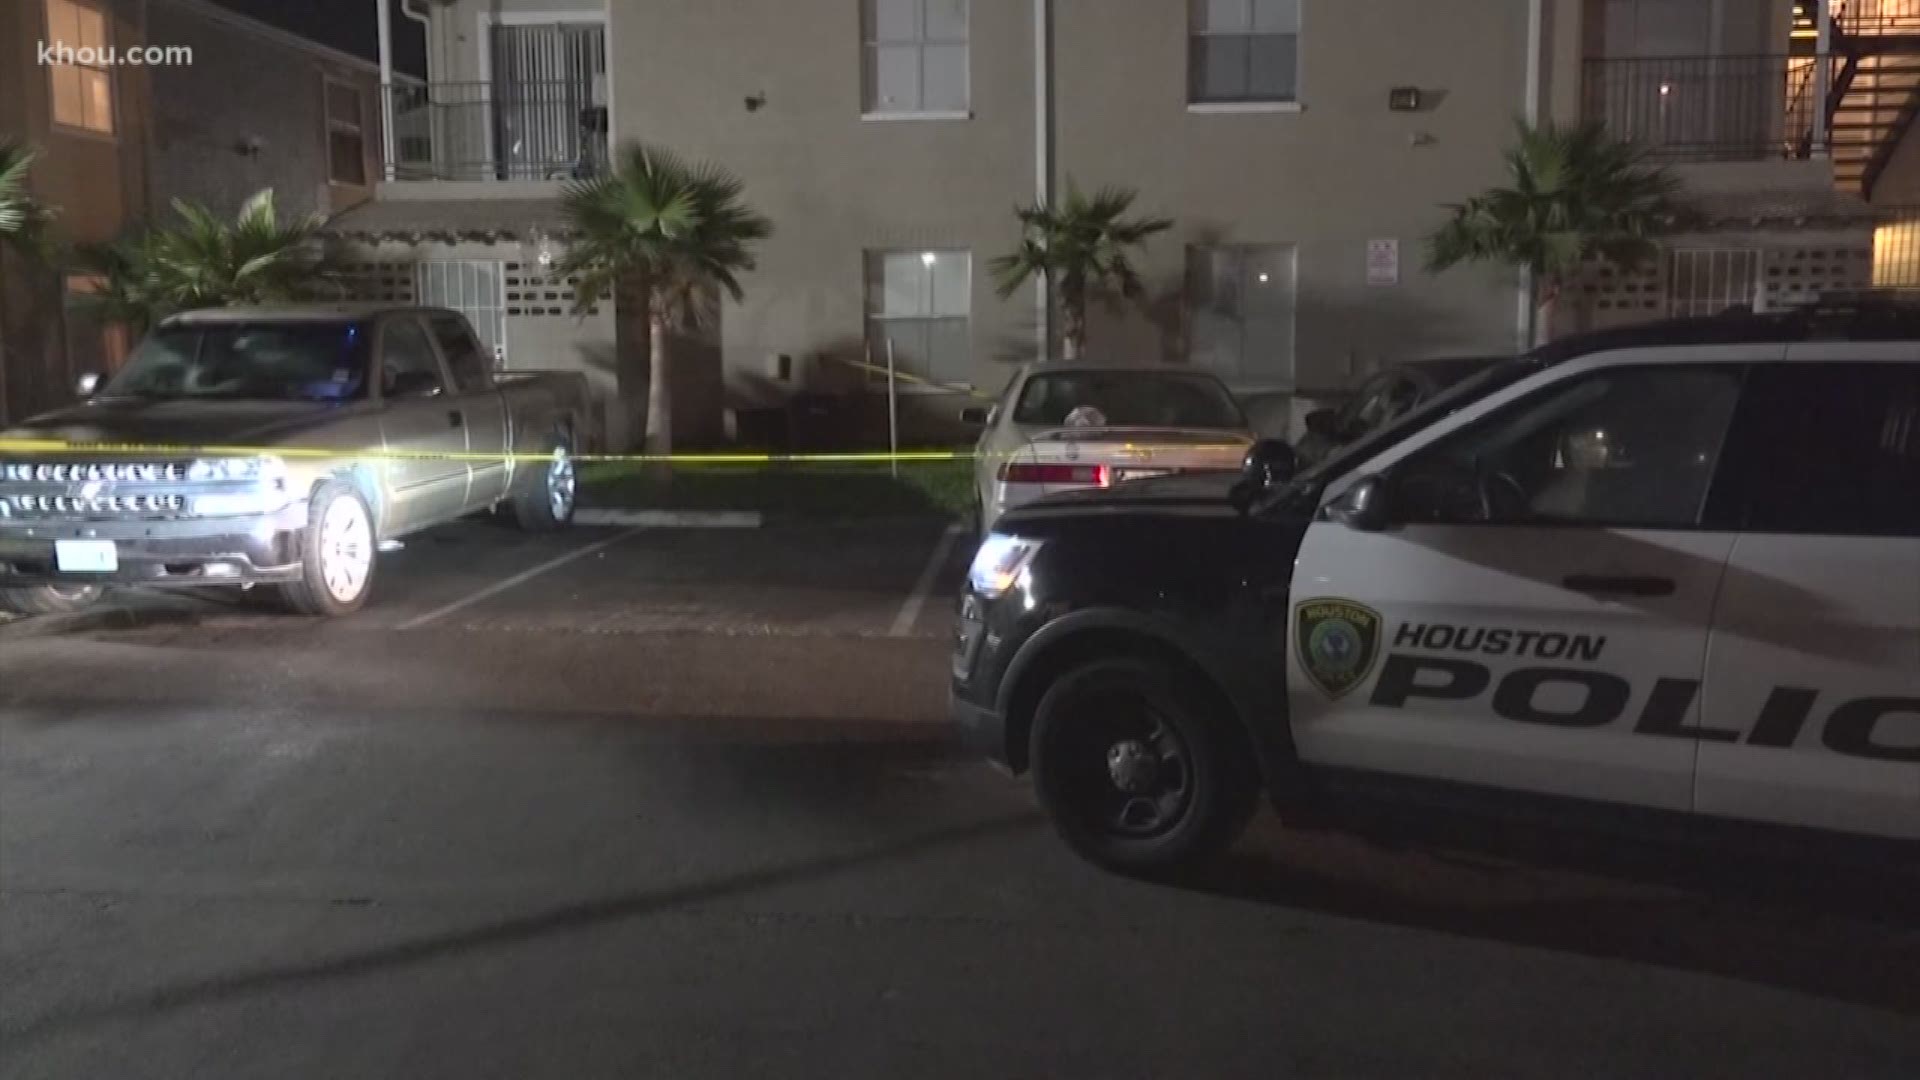 A man died after police say an intruder broke into his apartment and shot him while he was showering Wednesday night.